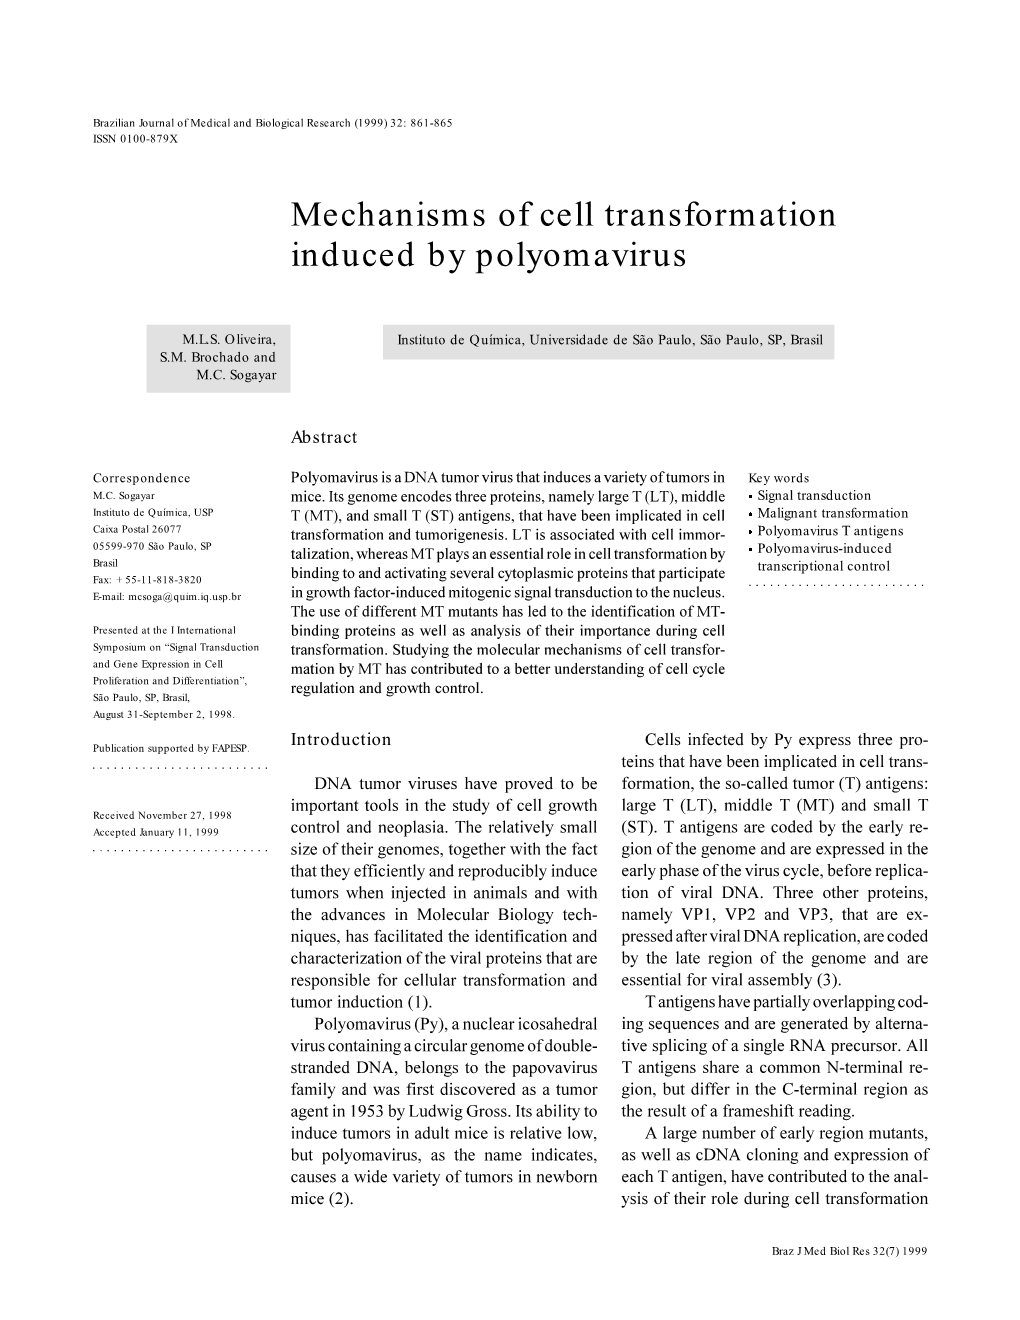 Mechanisms of Cell Transformation Induced by Polyomavirus